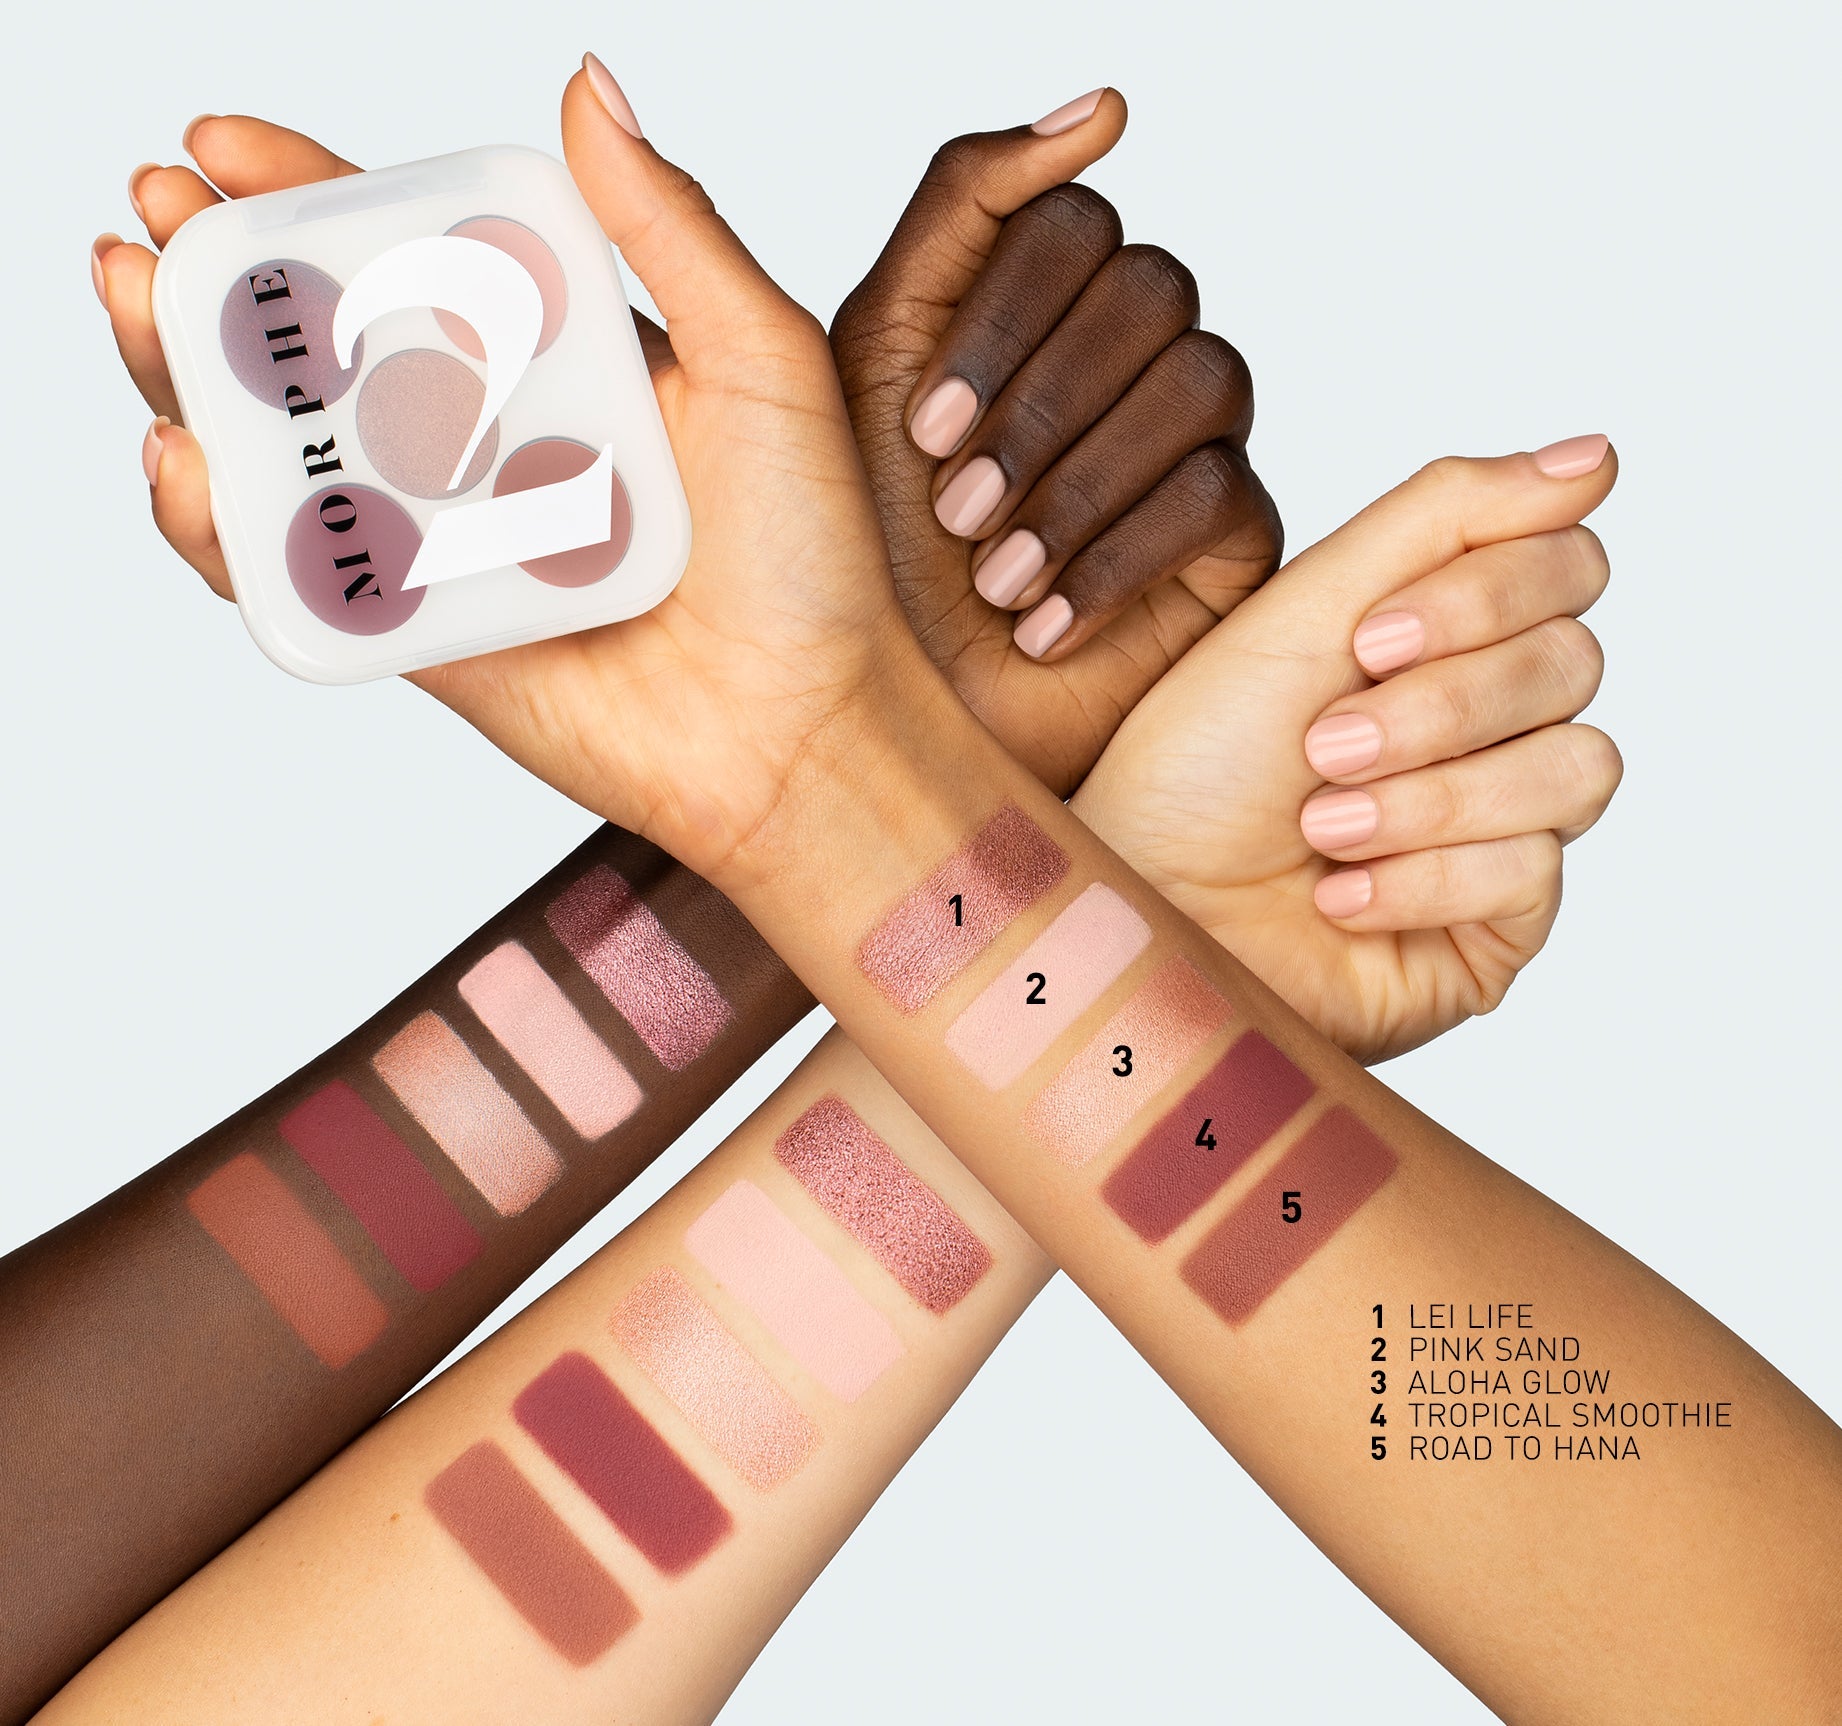 Ready In 5 Eyeshadow Palette-From Hawaii With Love - Image 3